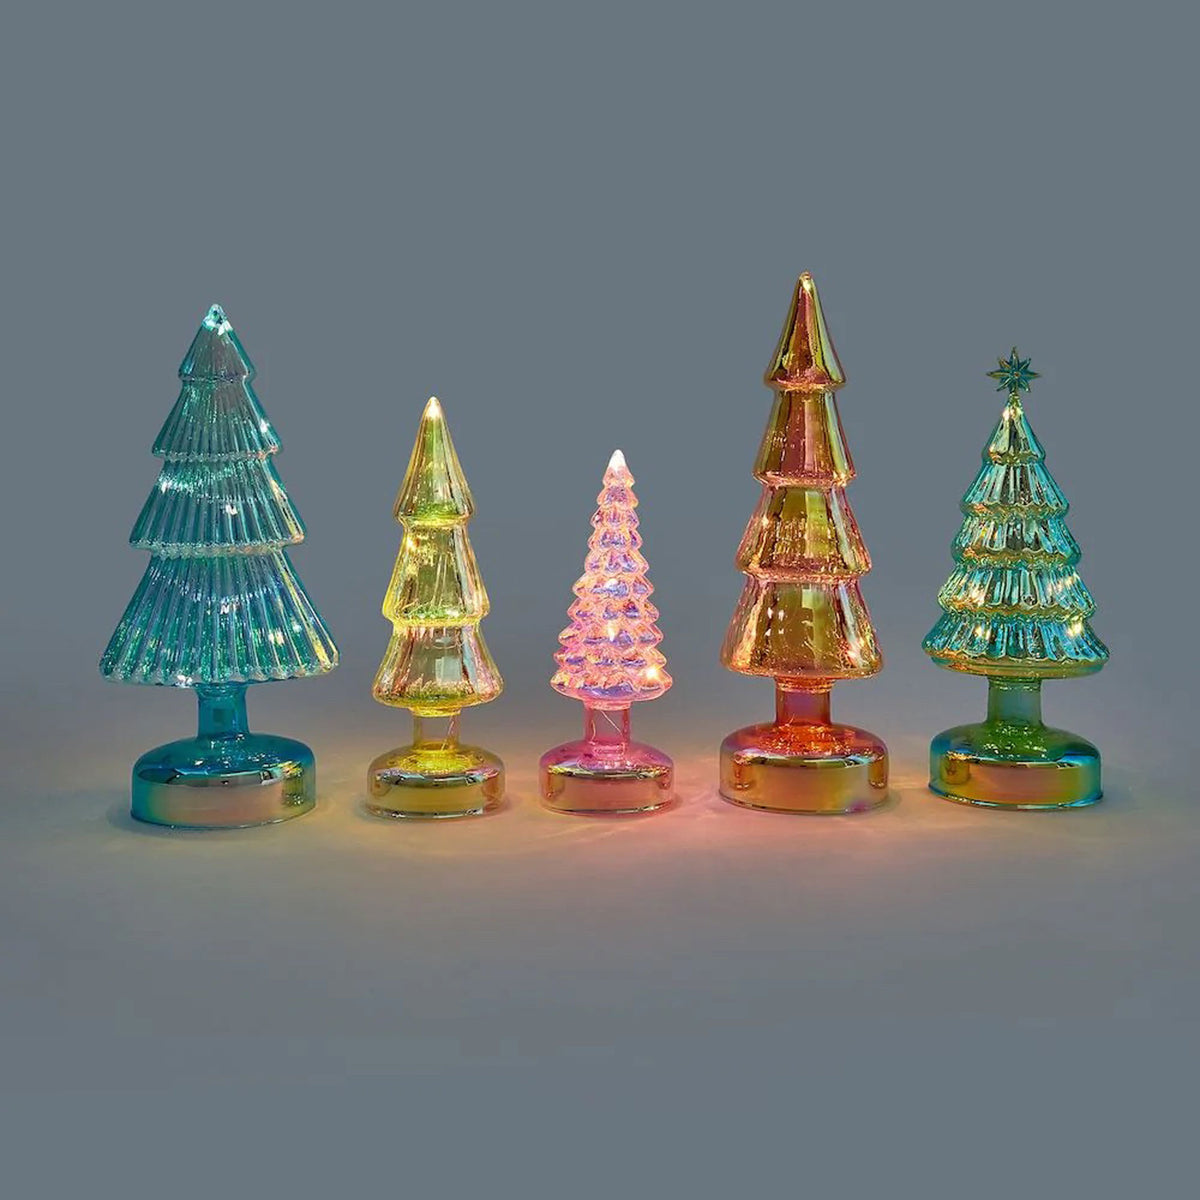 LED LIGHTED Colorful | GLASS Small Glas-TANNENBÄUME Bele mit LED TREES